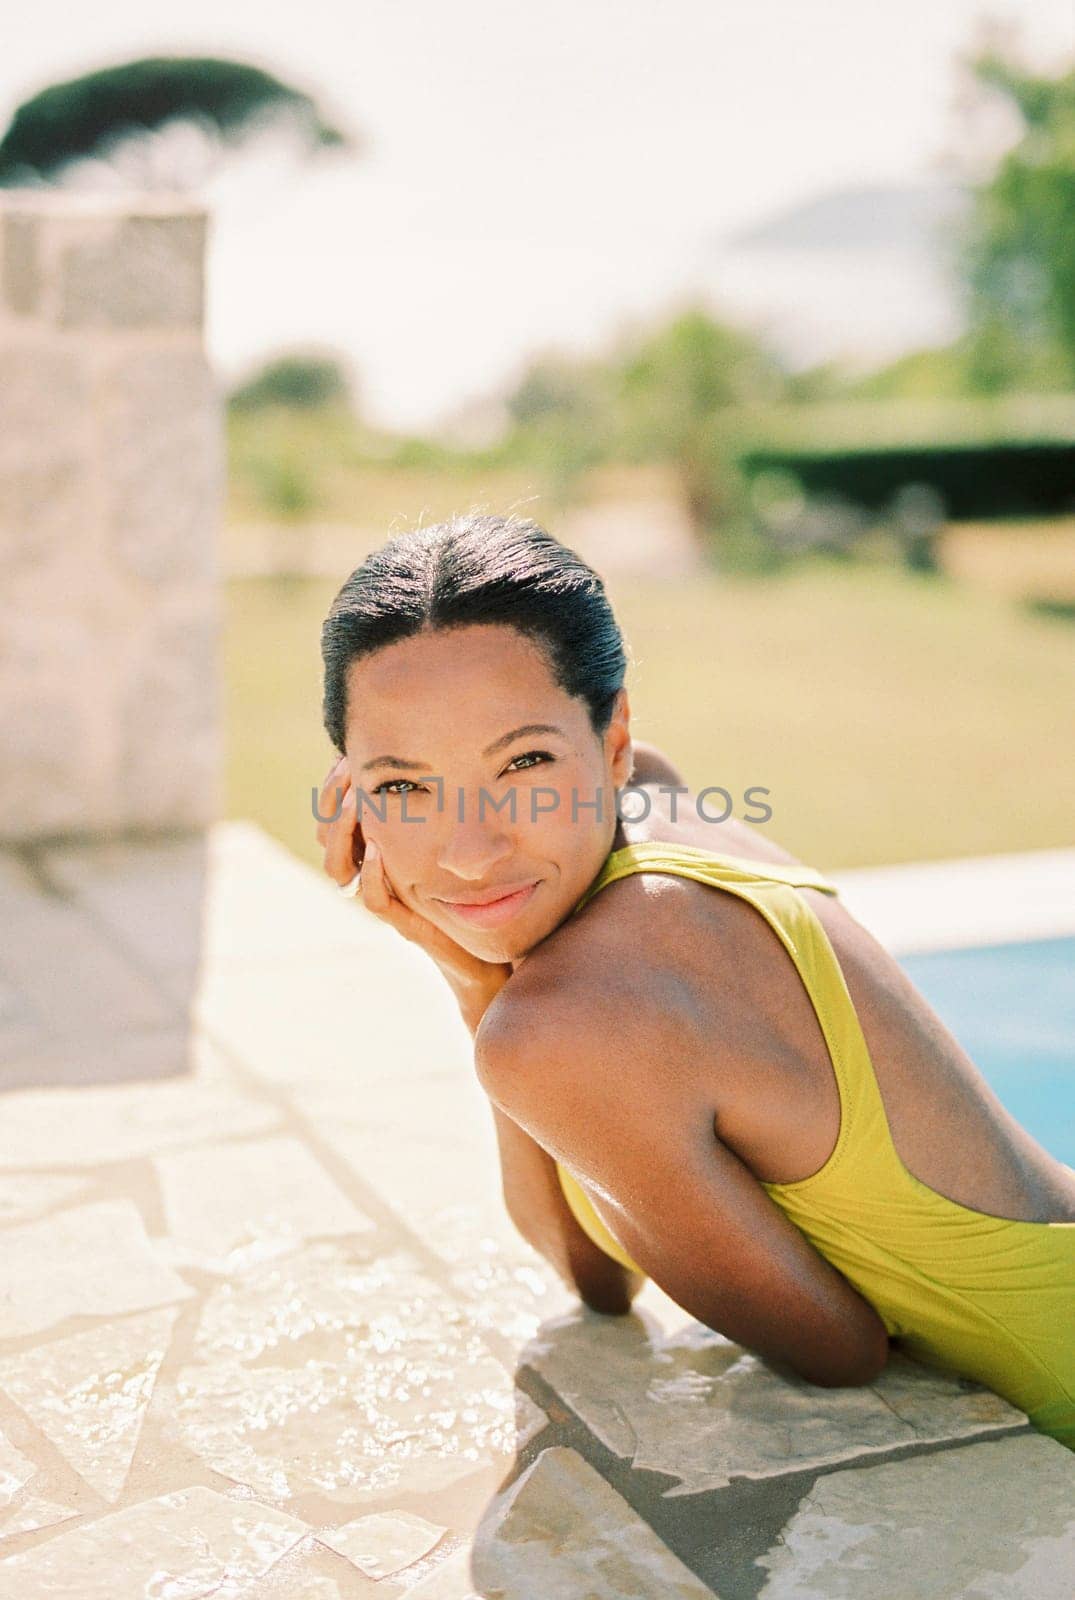 Smiling young woman resting her chin on her hand while standing in the pool and leaning on the side by Nadtochiy